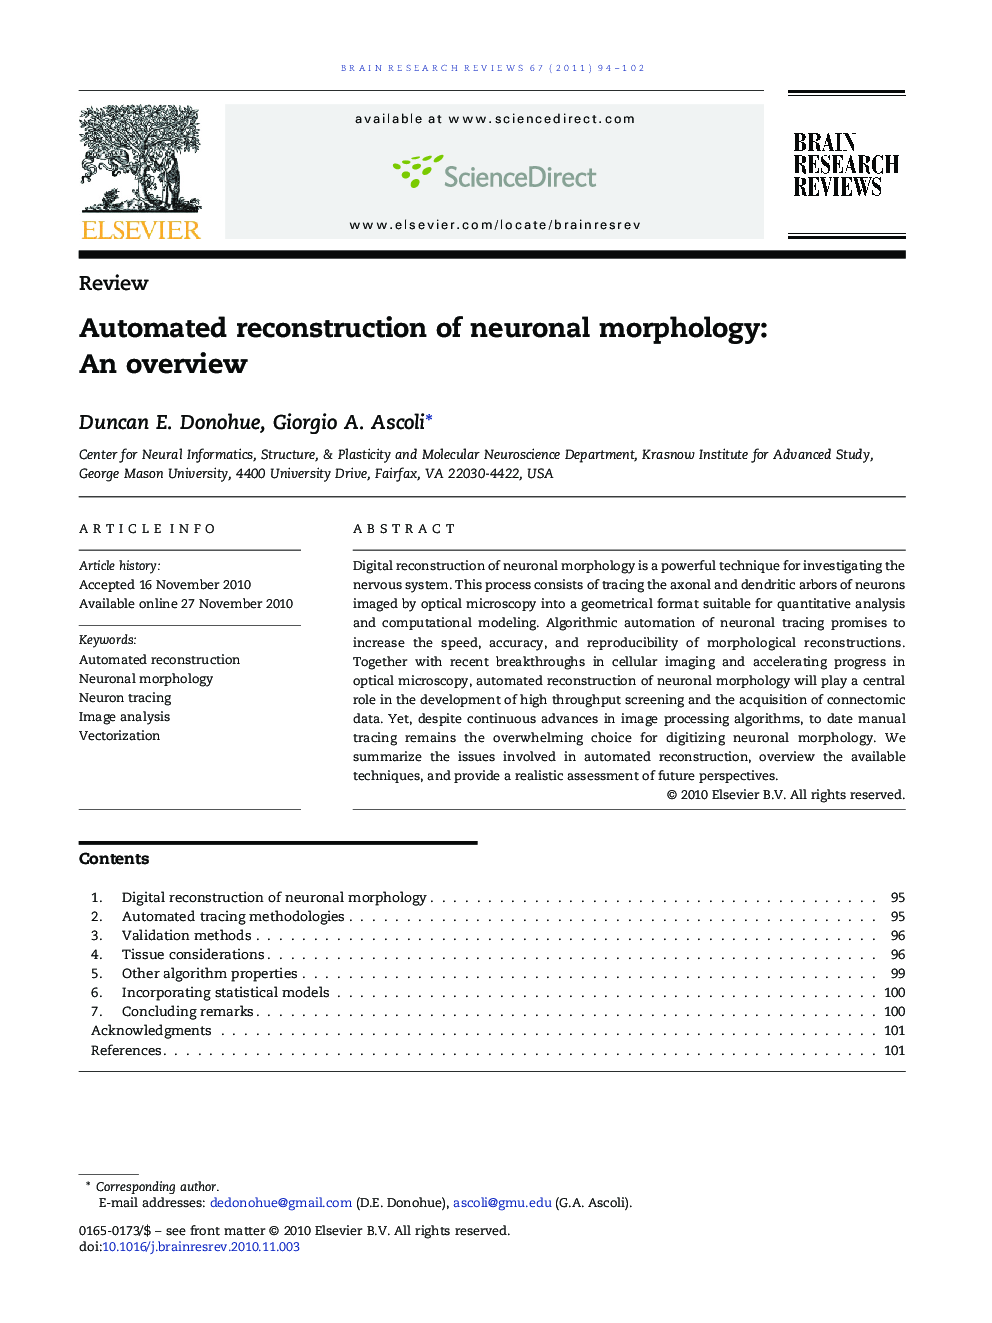 Automated reconstruction of neuronal morphology: An overview